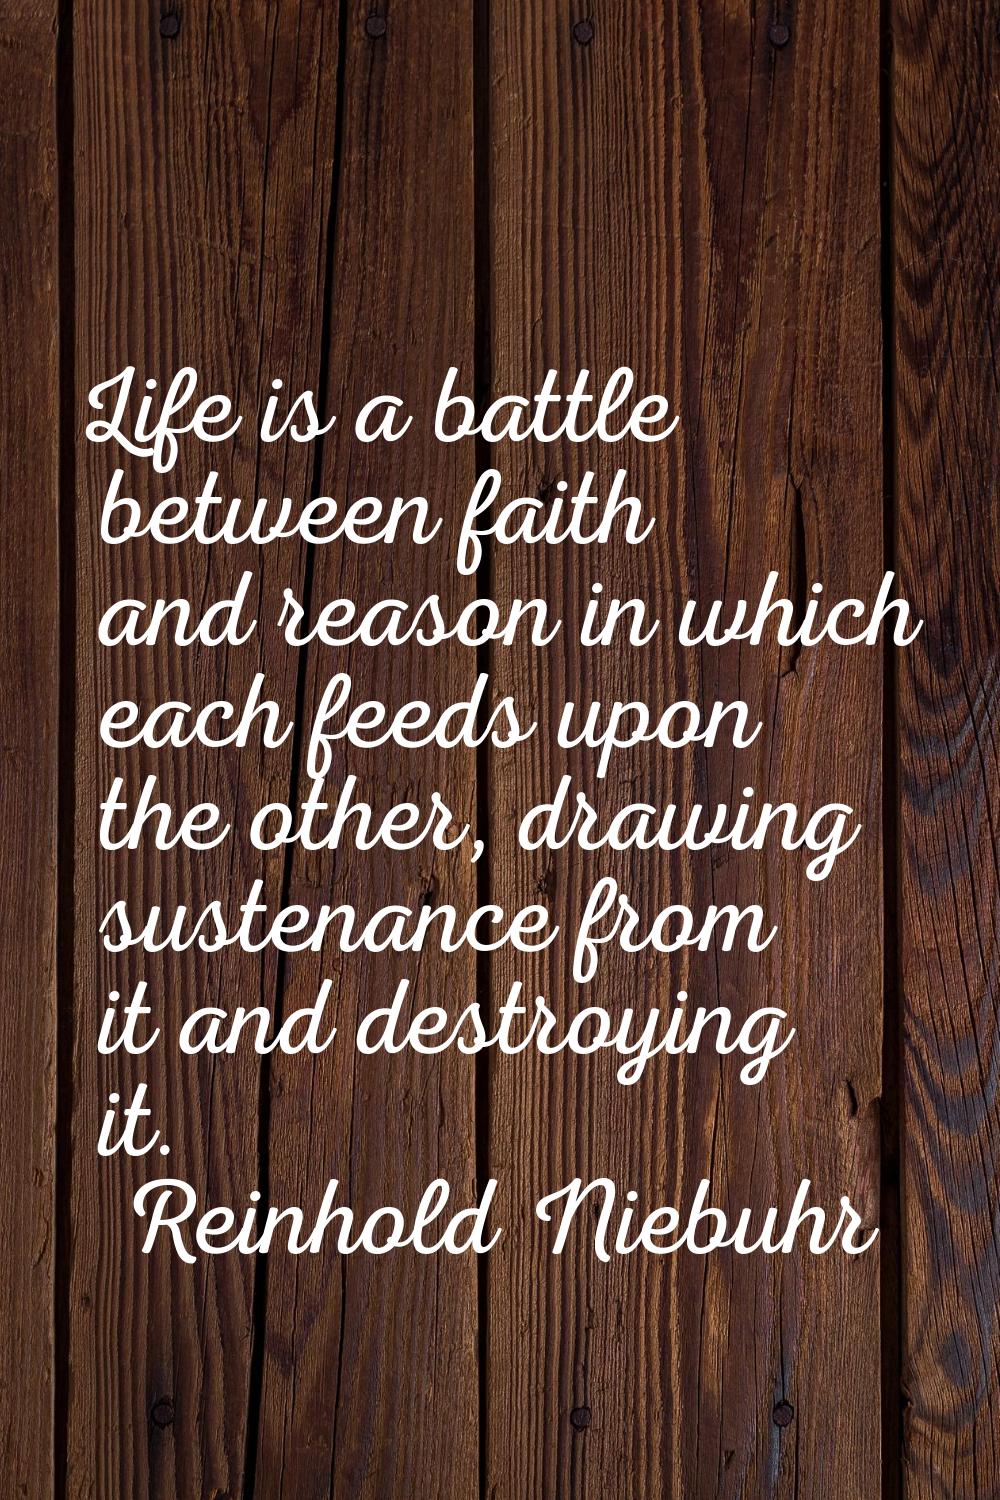 Life is a battle between faith and reason in which each feeds upon the other, drawing sustenance fr